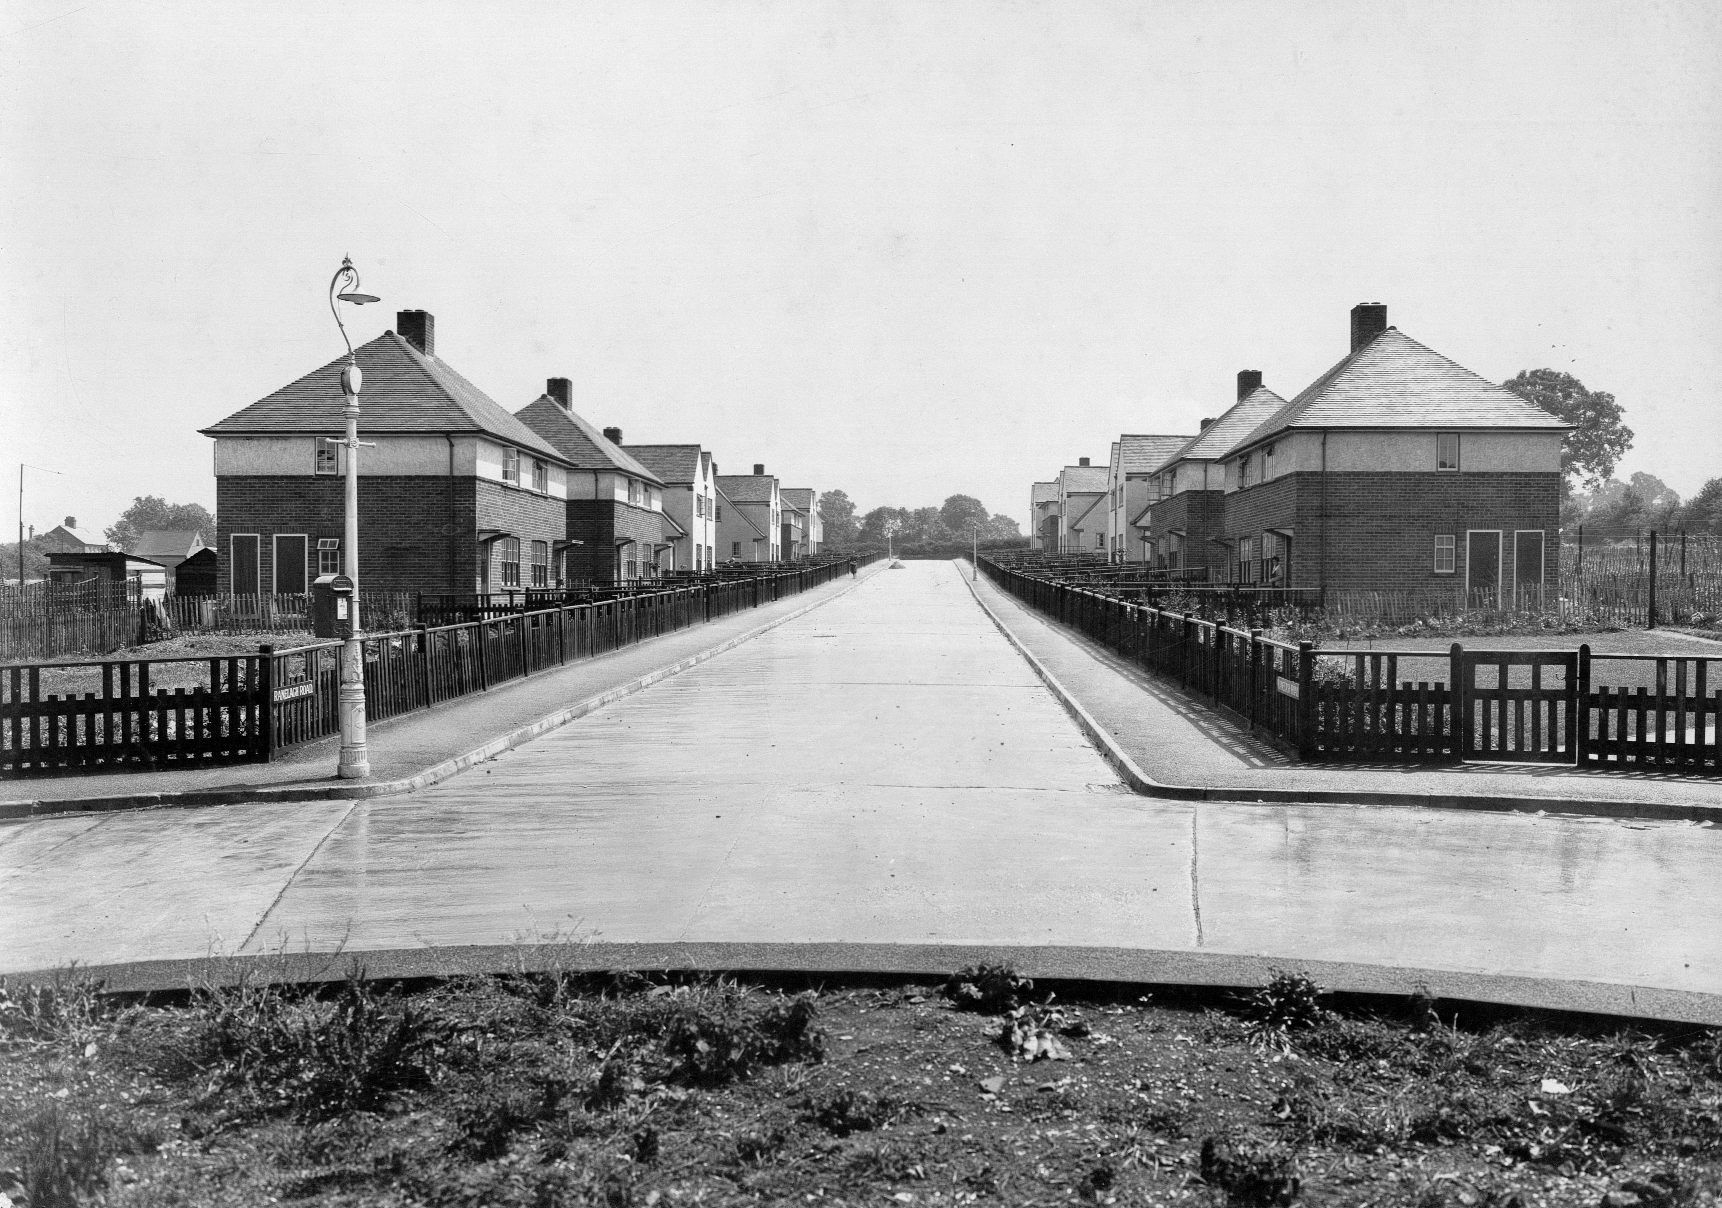 Homes for employees at Ranelagh Road | F. Sims & Co., Hemel Hempstead Library Collection